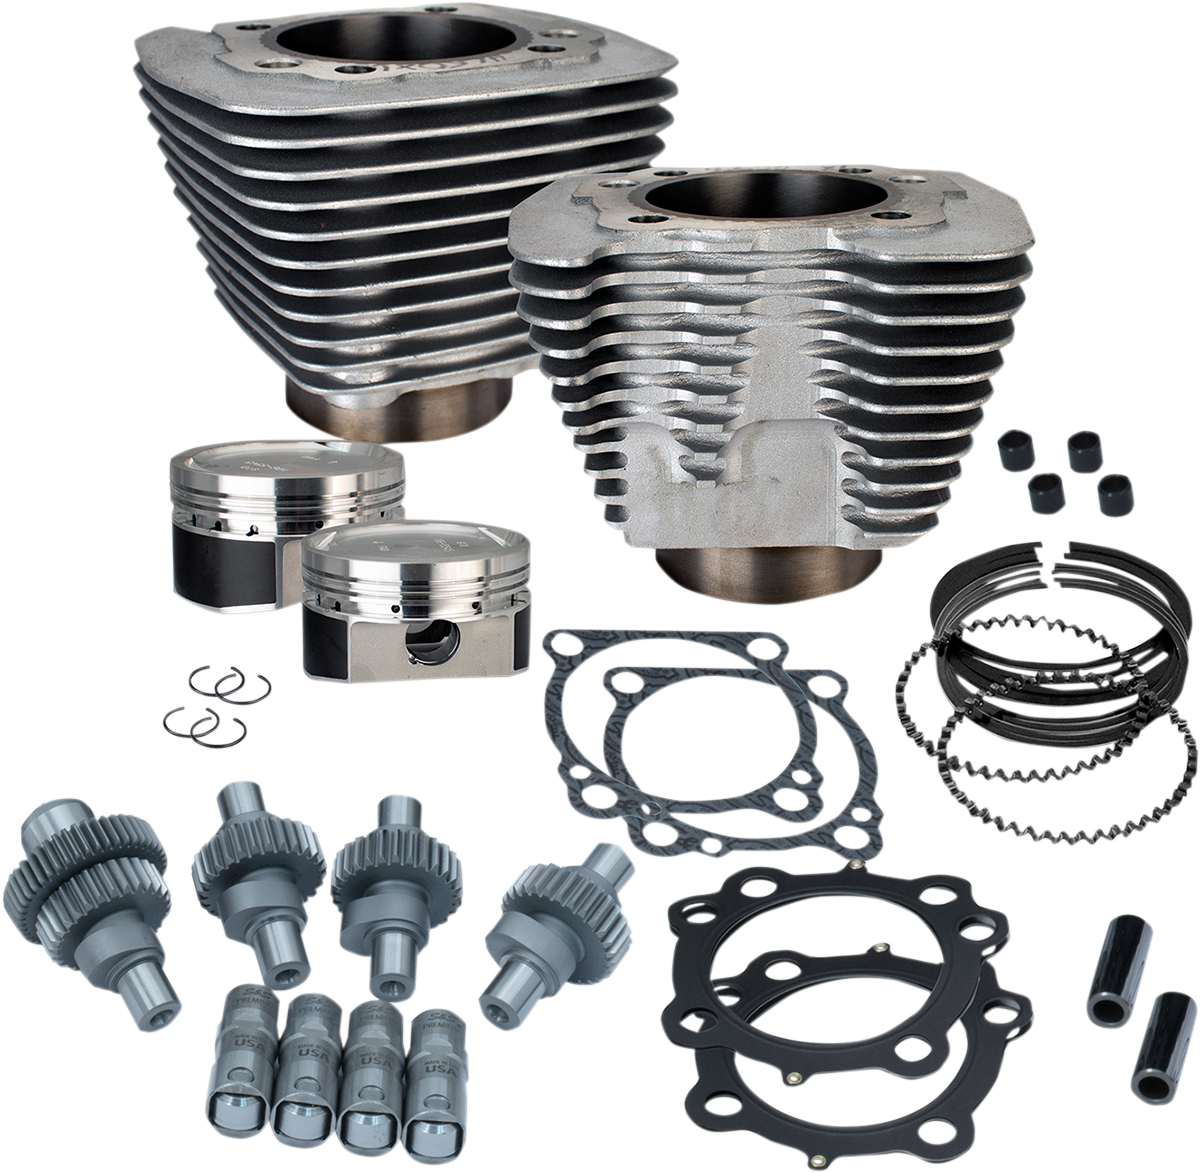 S&S CYCLE Hooligan Kit - 883-1200 - Silver 910-0700